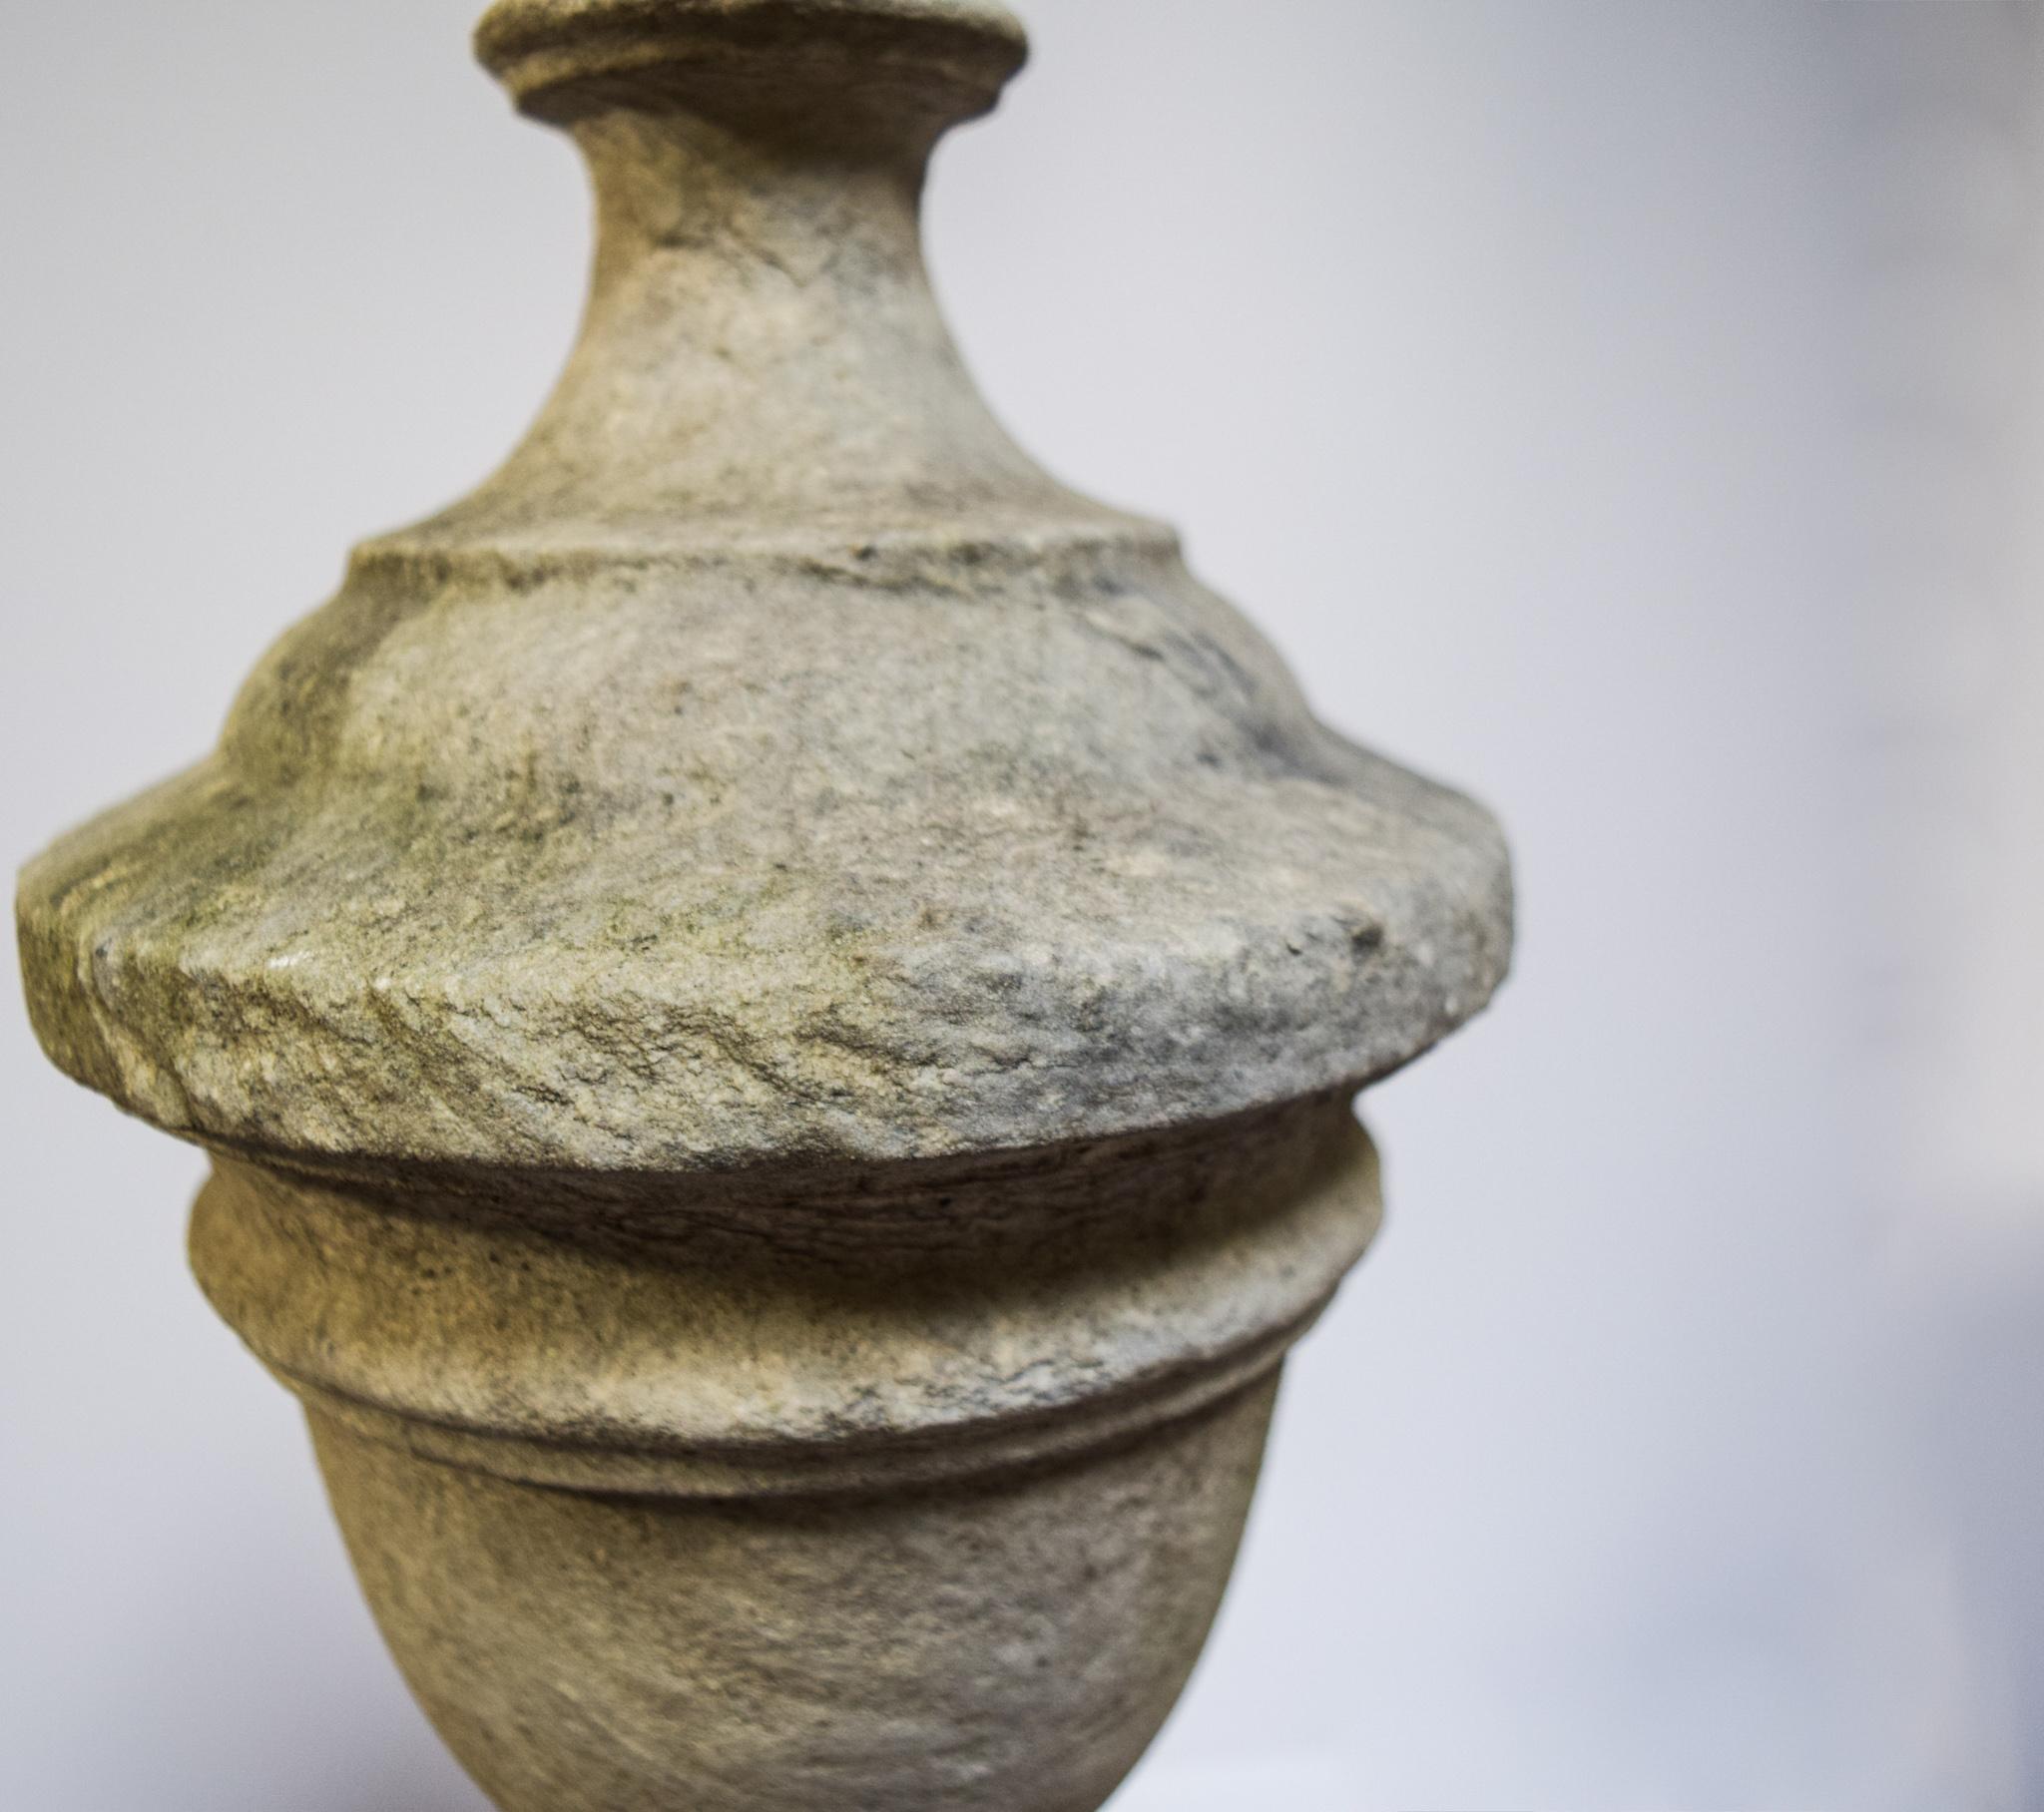 A limestone finial can enhance a garden in an authentic and unique way. This vintage English finial is perfectly weathered and would make a wonderful accent piece for any estate. Vintage limestone is elegant way to enrich an environment, whether it